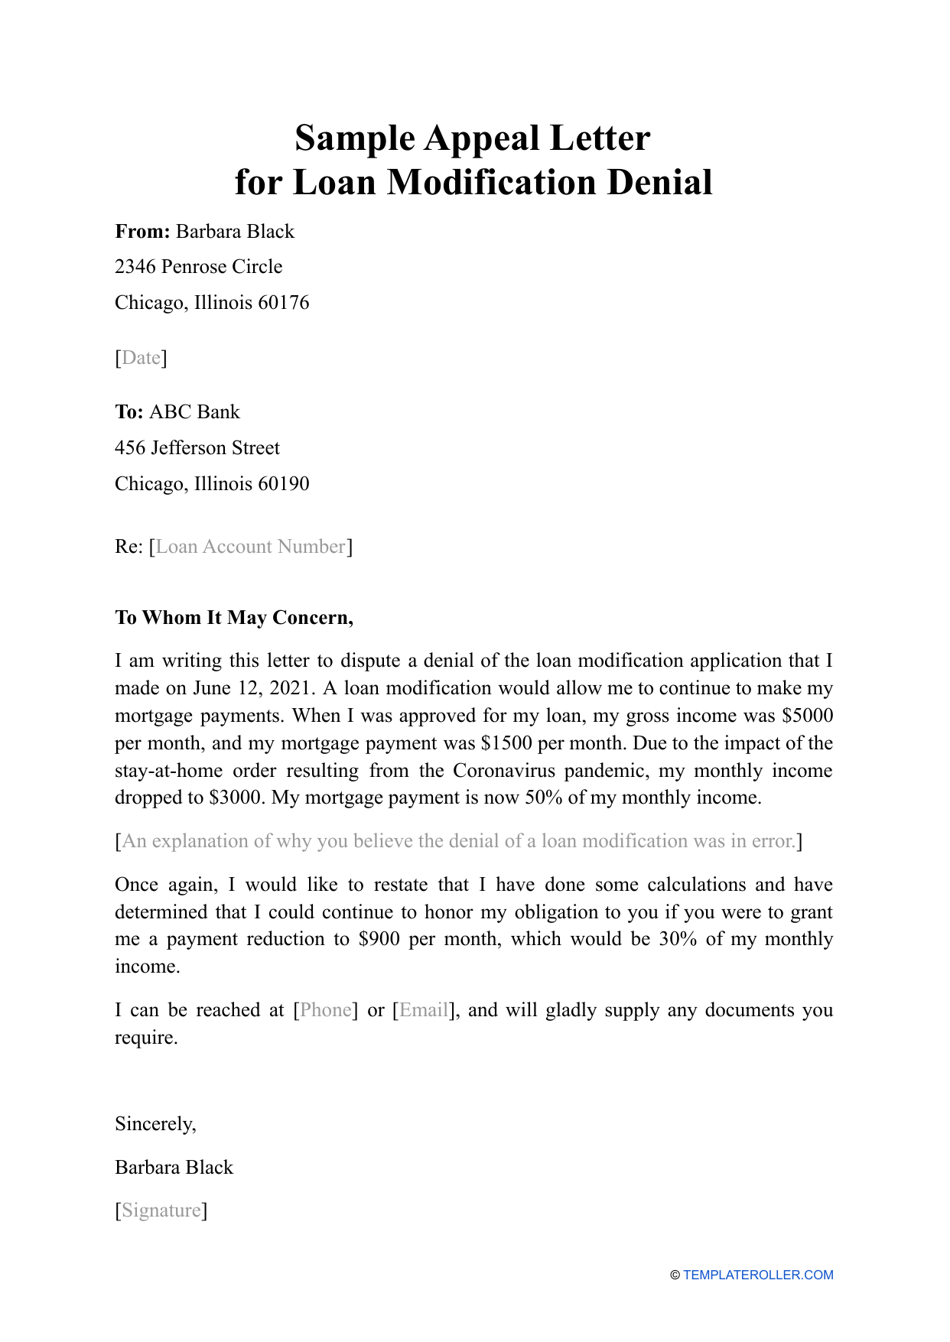 Sample Appeal Letter for Loan Modification Denial Download In Payoff Letter Template